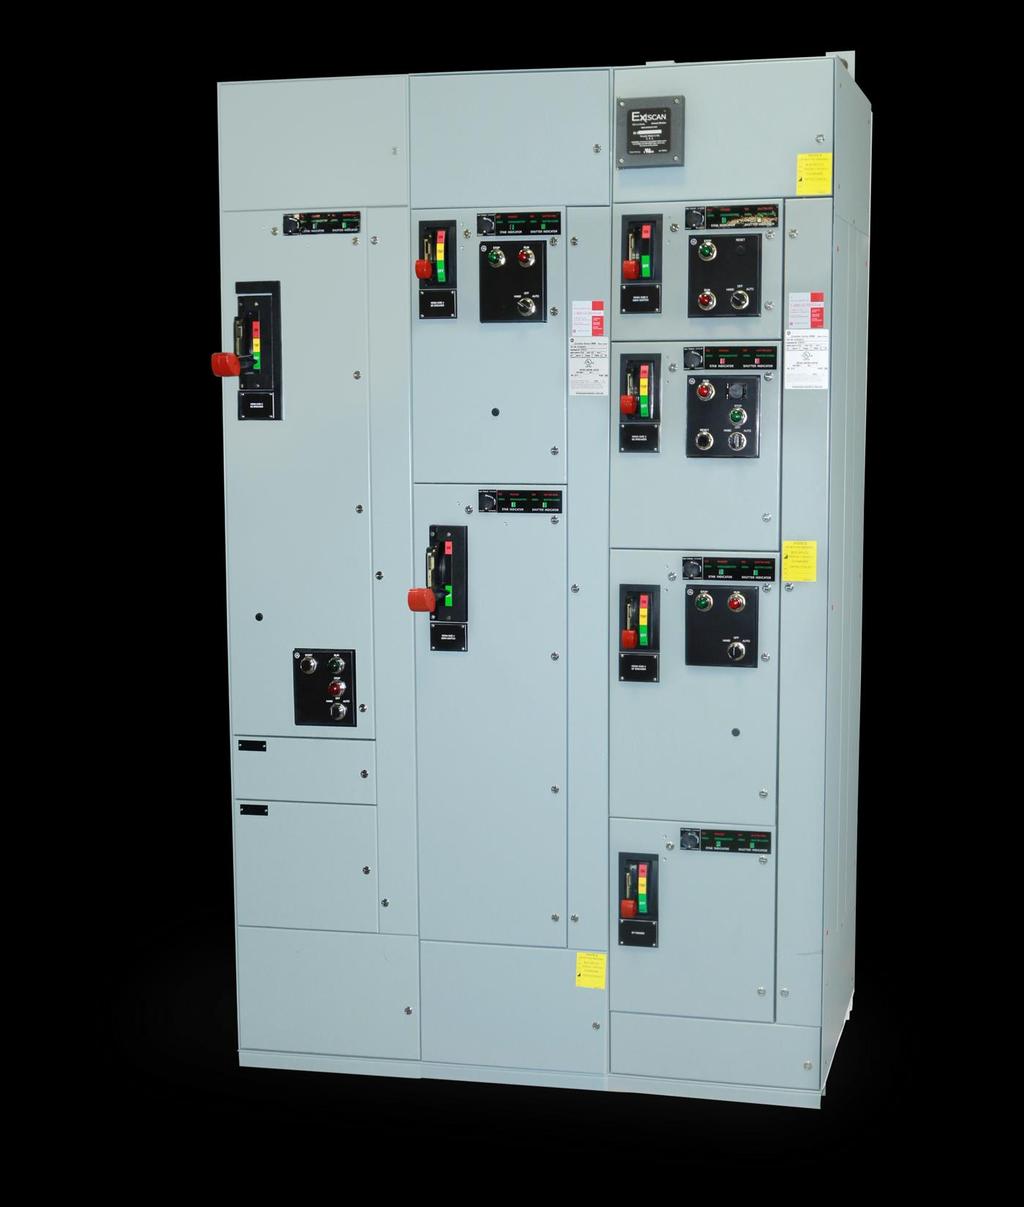 New Level of Arc Flash Mitigation The use of a compact NEMA rated contactor in the AFM units will